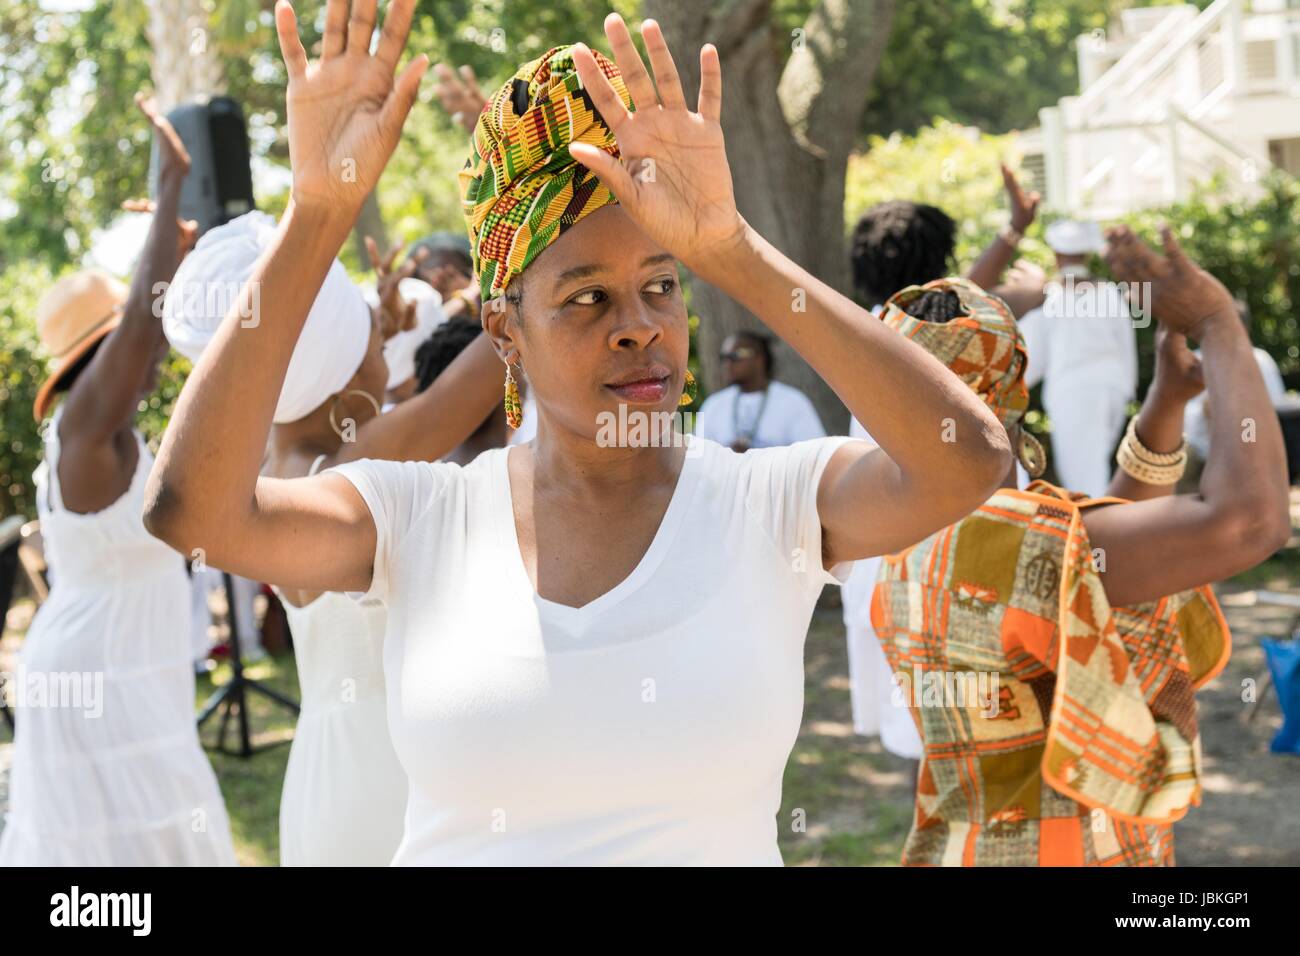 Descendants of enslaved Africans brought to Charleston in the Middle Passage dance to honor their relatives lost during a remembrance ceremony along the saltwater marsh June 10, 2017 in Sullivan's Island, South Carolina. The Middle Passage refers to the triangular trade in which millions of Africans were shipped to the New World as part of the Atlantic slave trade. An estimated 15% of the Africans died at sea and considerably more in the process of capturing and transporting. The total number of African deaths directly attributable to the Middle Passage voyage is estimated at up to two million Stock Photo